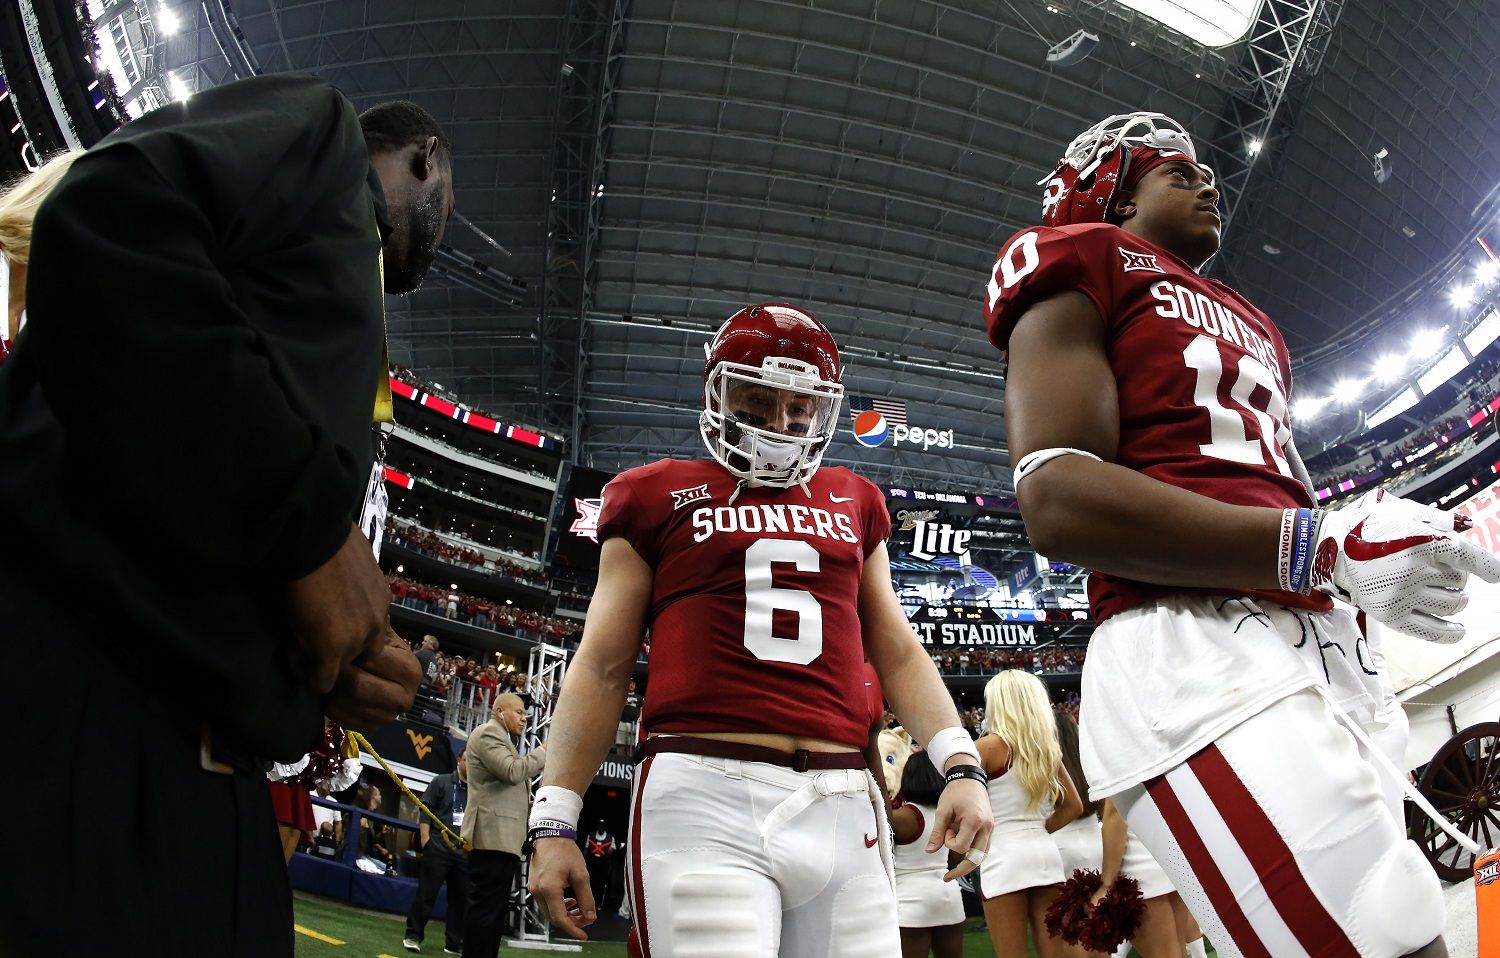 ARLINGTON, TX - DECEMBER 2: Baker Mayfield #6 of the Oklahoma Sooners takes the field with teammates before playing the TCU Horned Frogs during the first half at AT&amp;T Stadium on December 2, 2017 in Arlington, Texas. OU won 41-17. (Photo by Ron Jenkins/Getty Images)